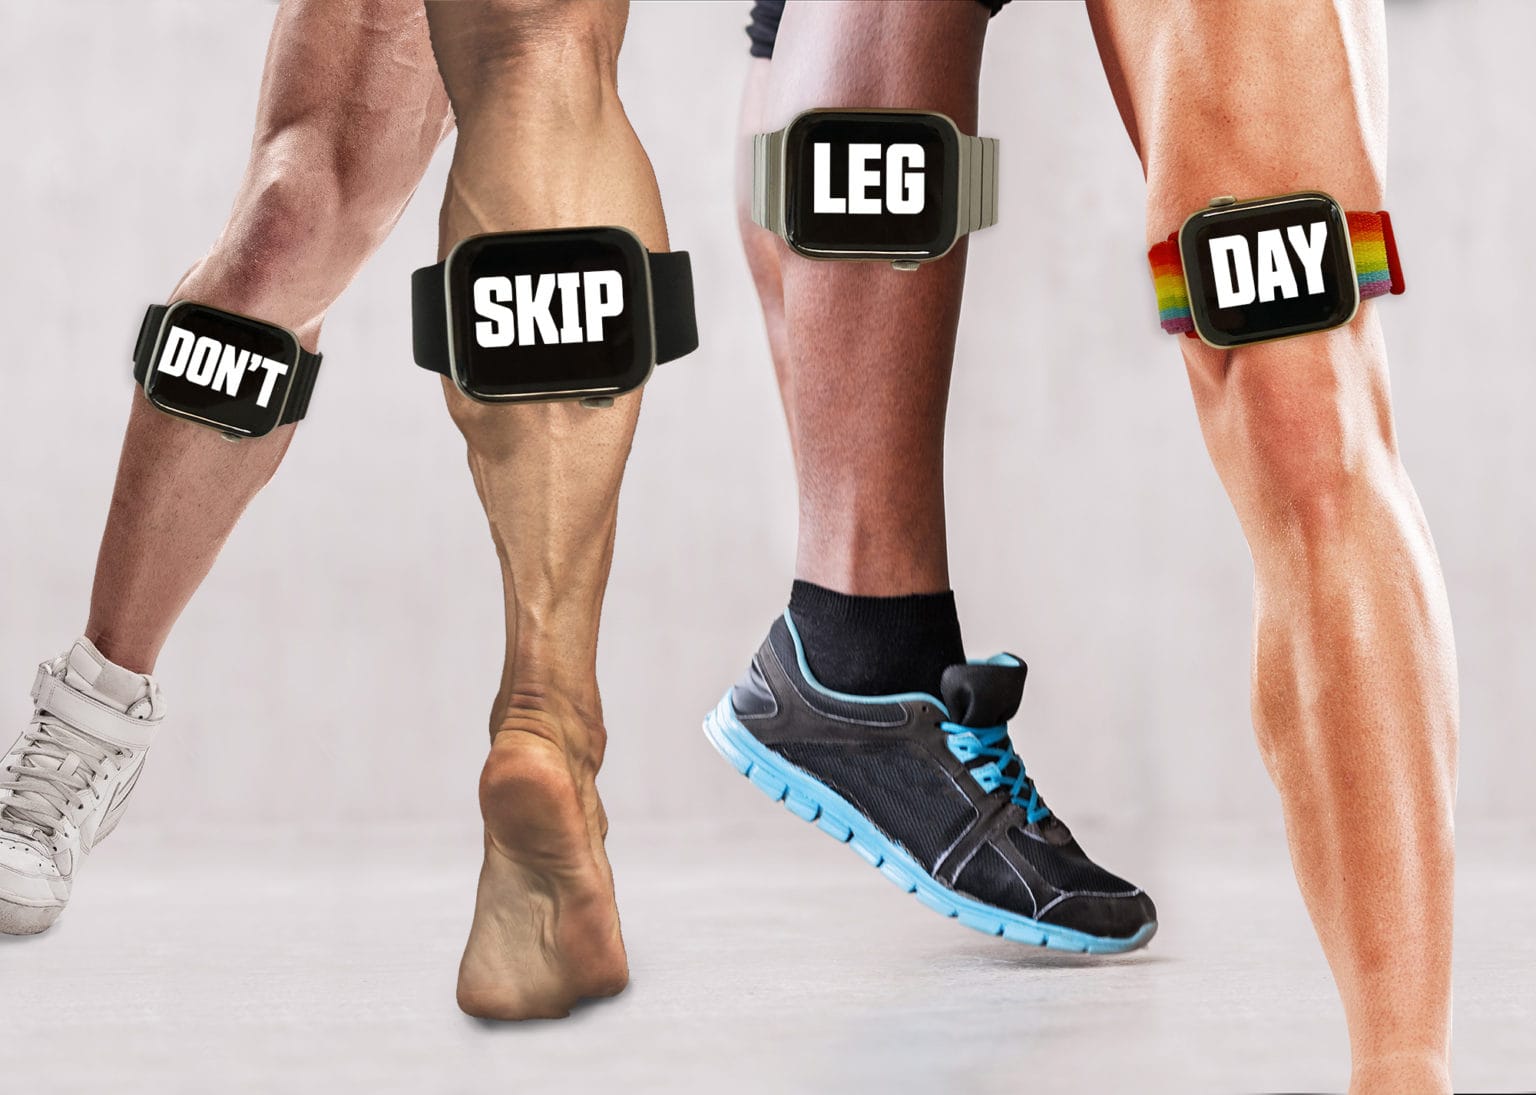 If you want to get in shape, definitely don't skip leg day